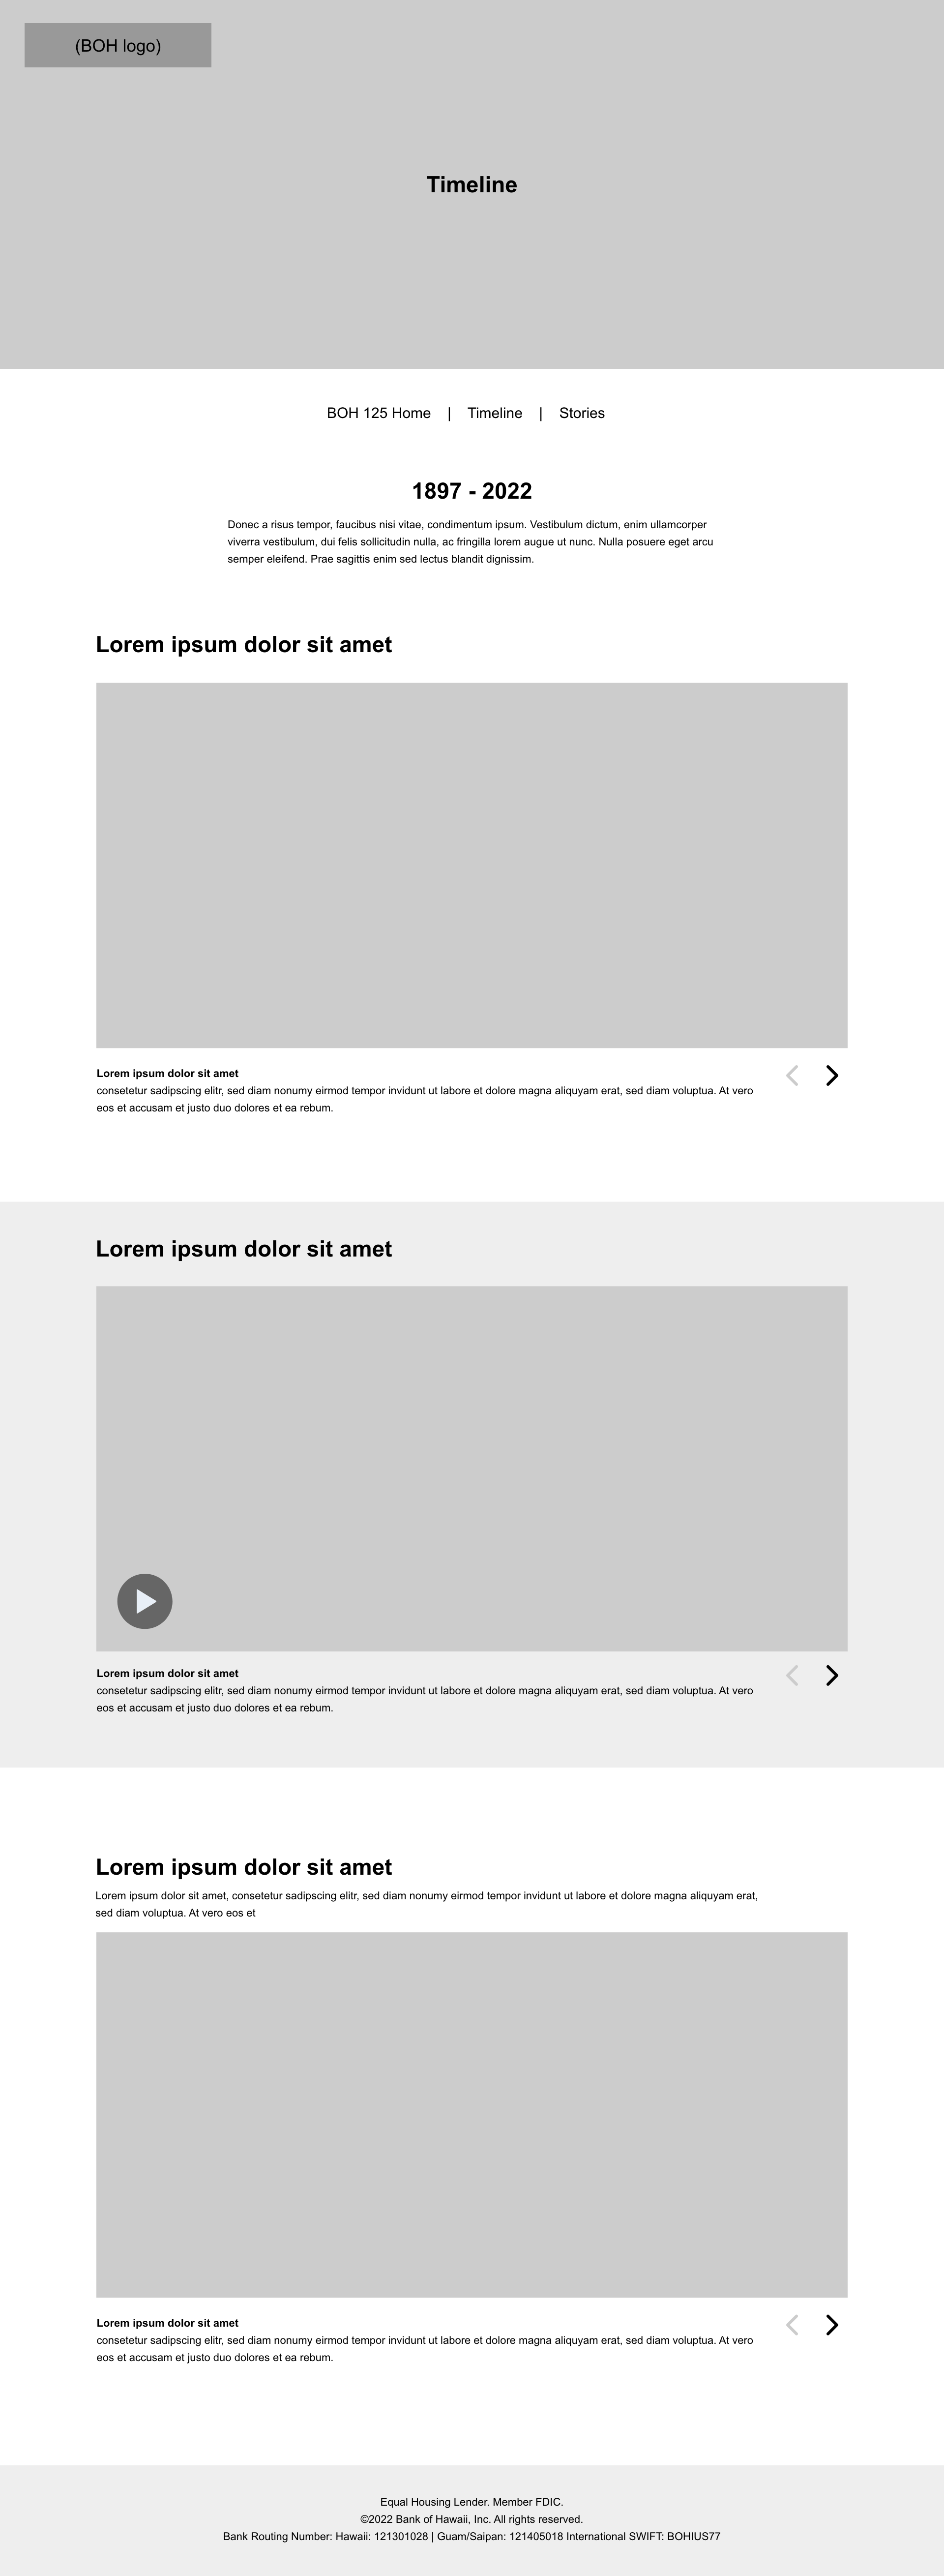 timeline page wireframes